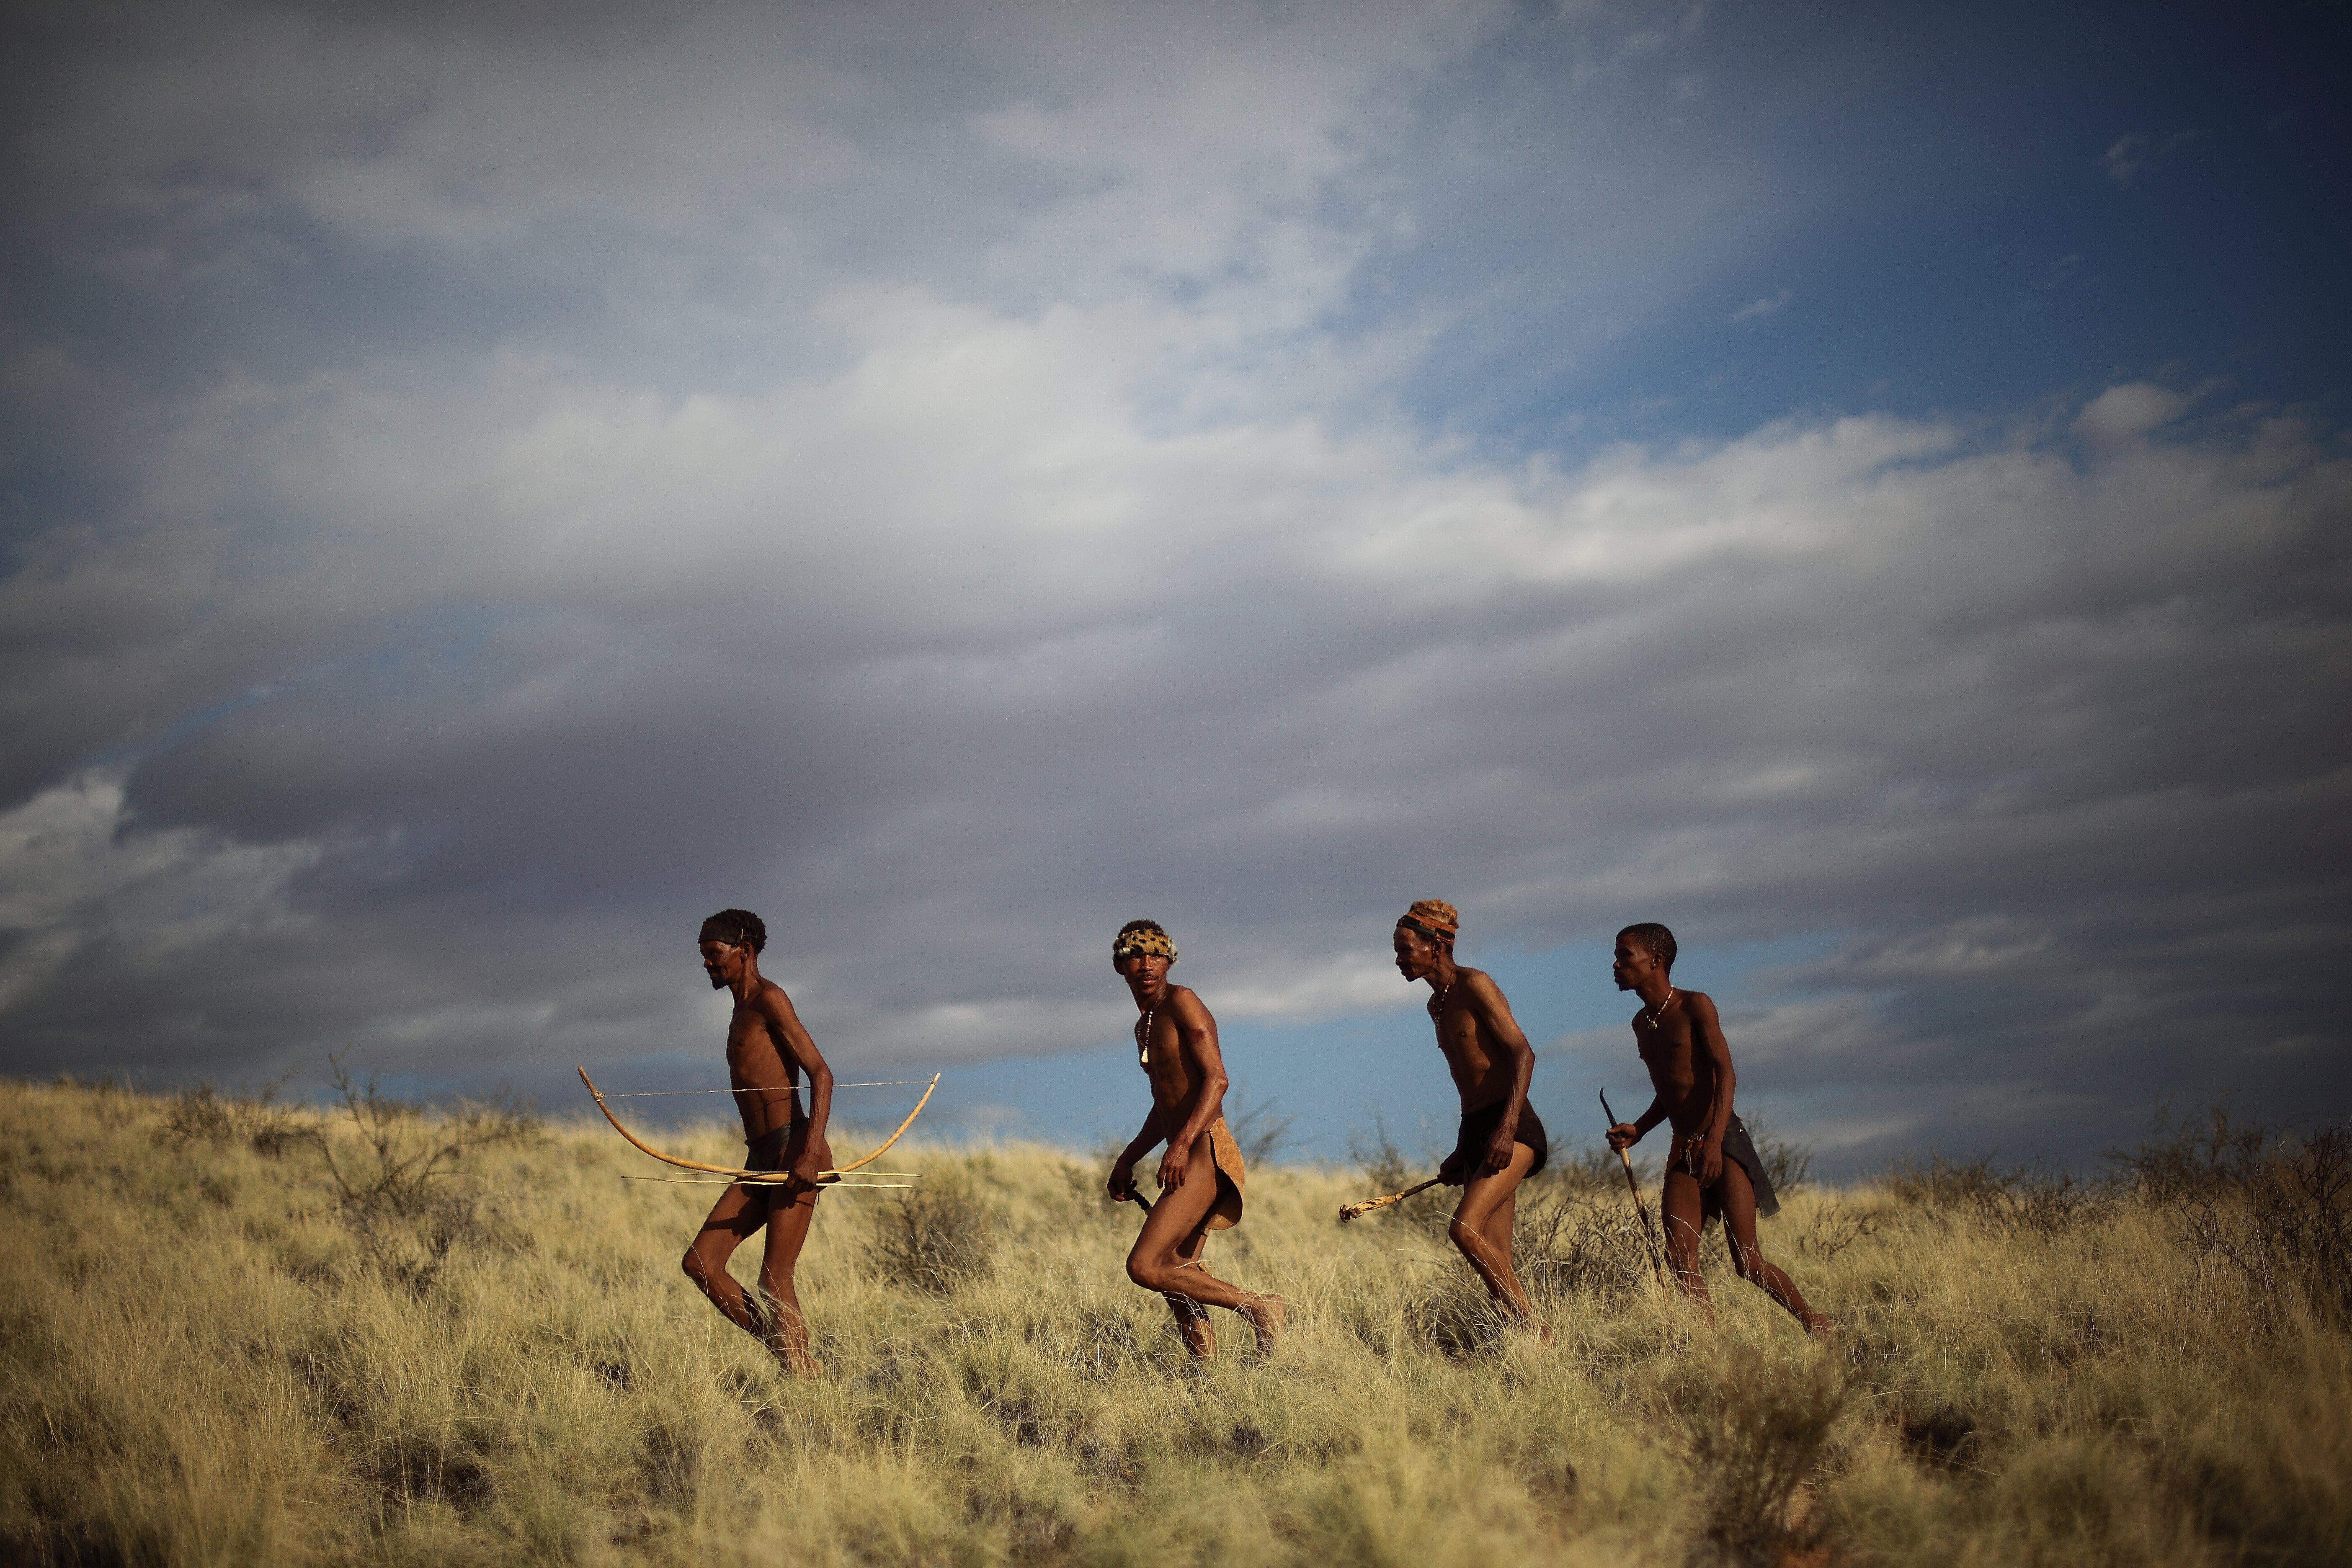 Modern hunter-gatherers offer an insight to an ancient way of life